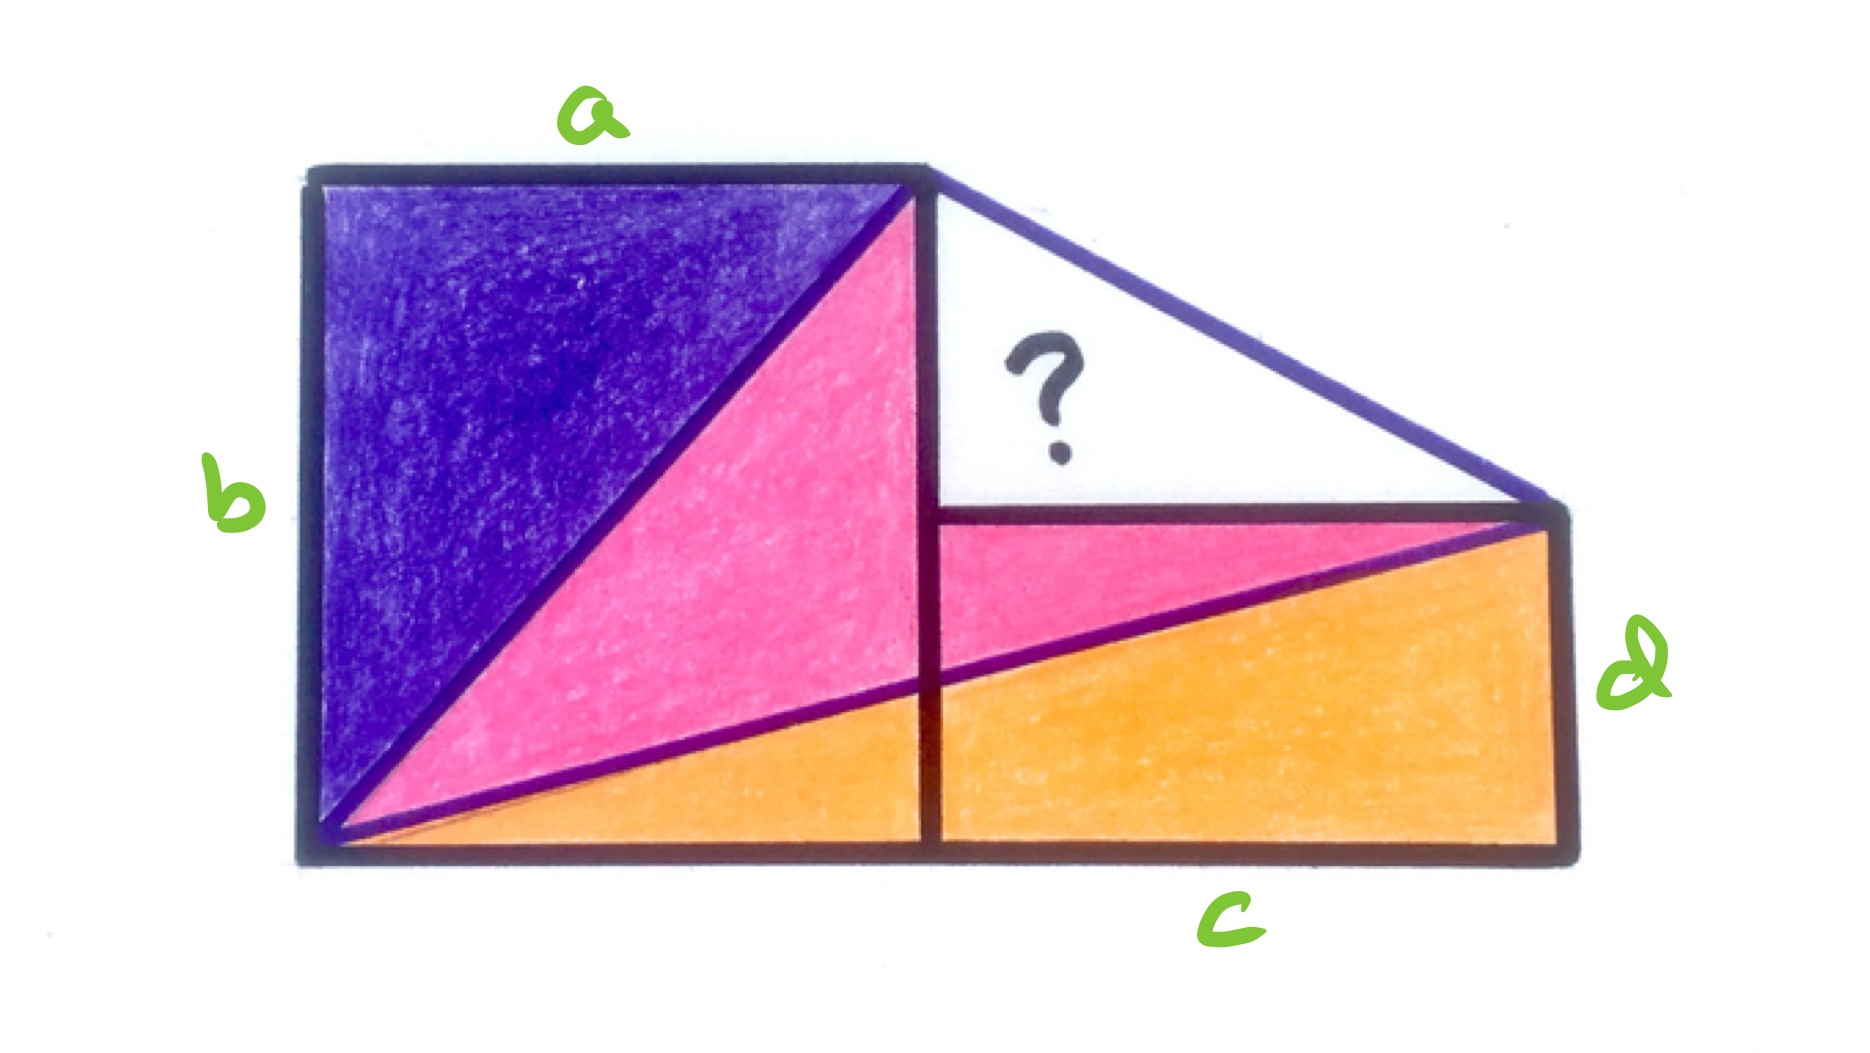 Triangle over two rectangles labelled